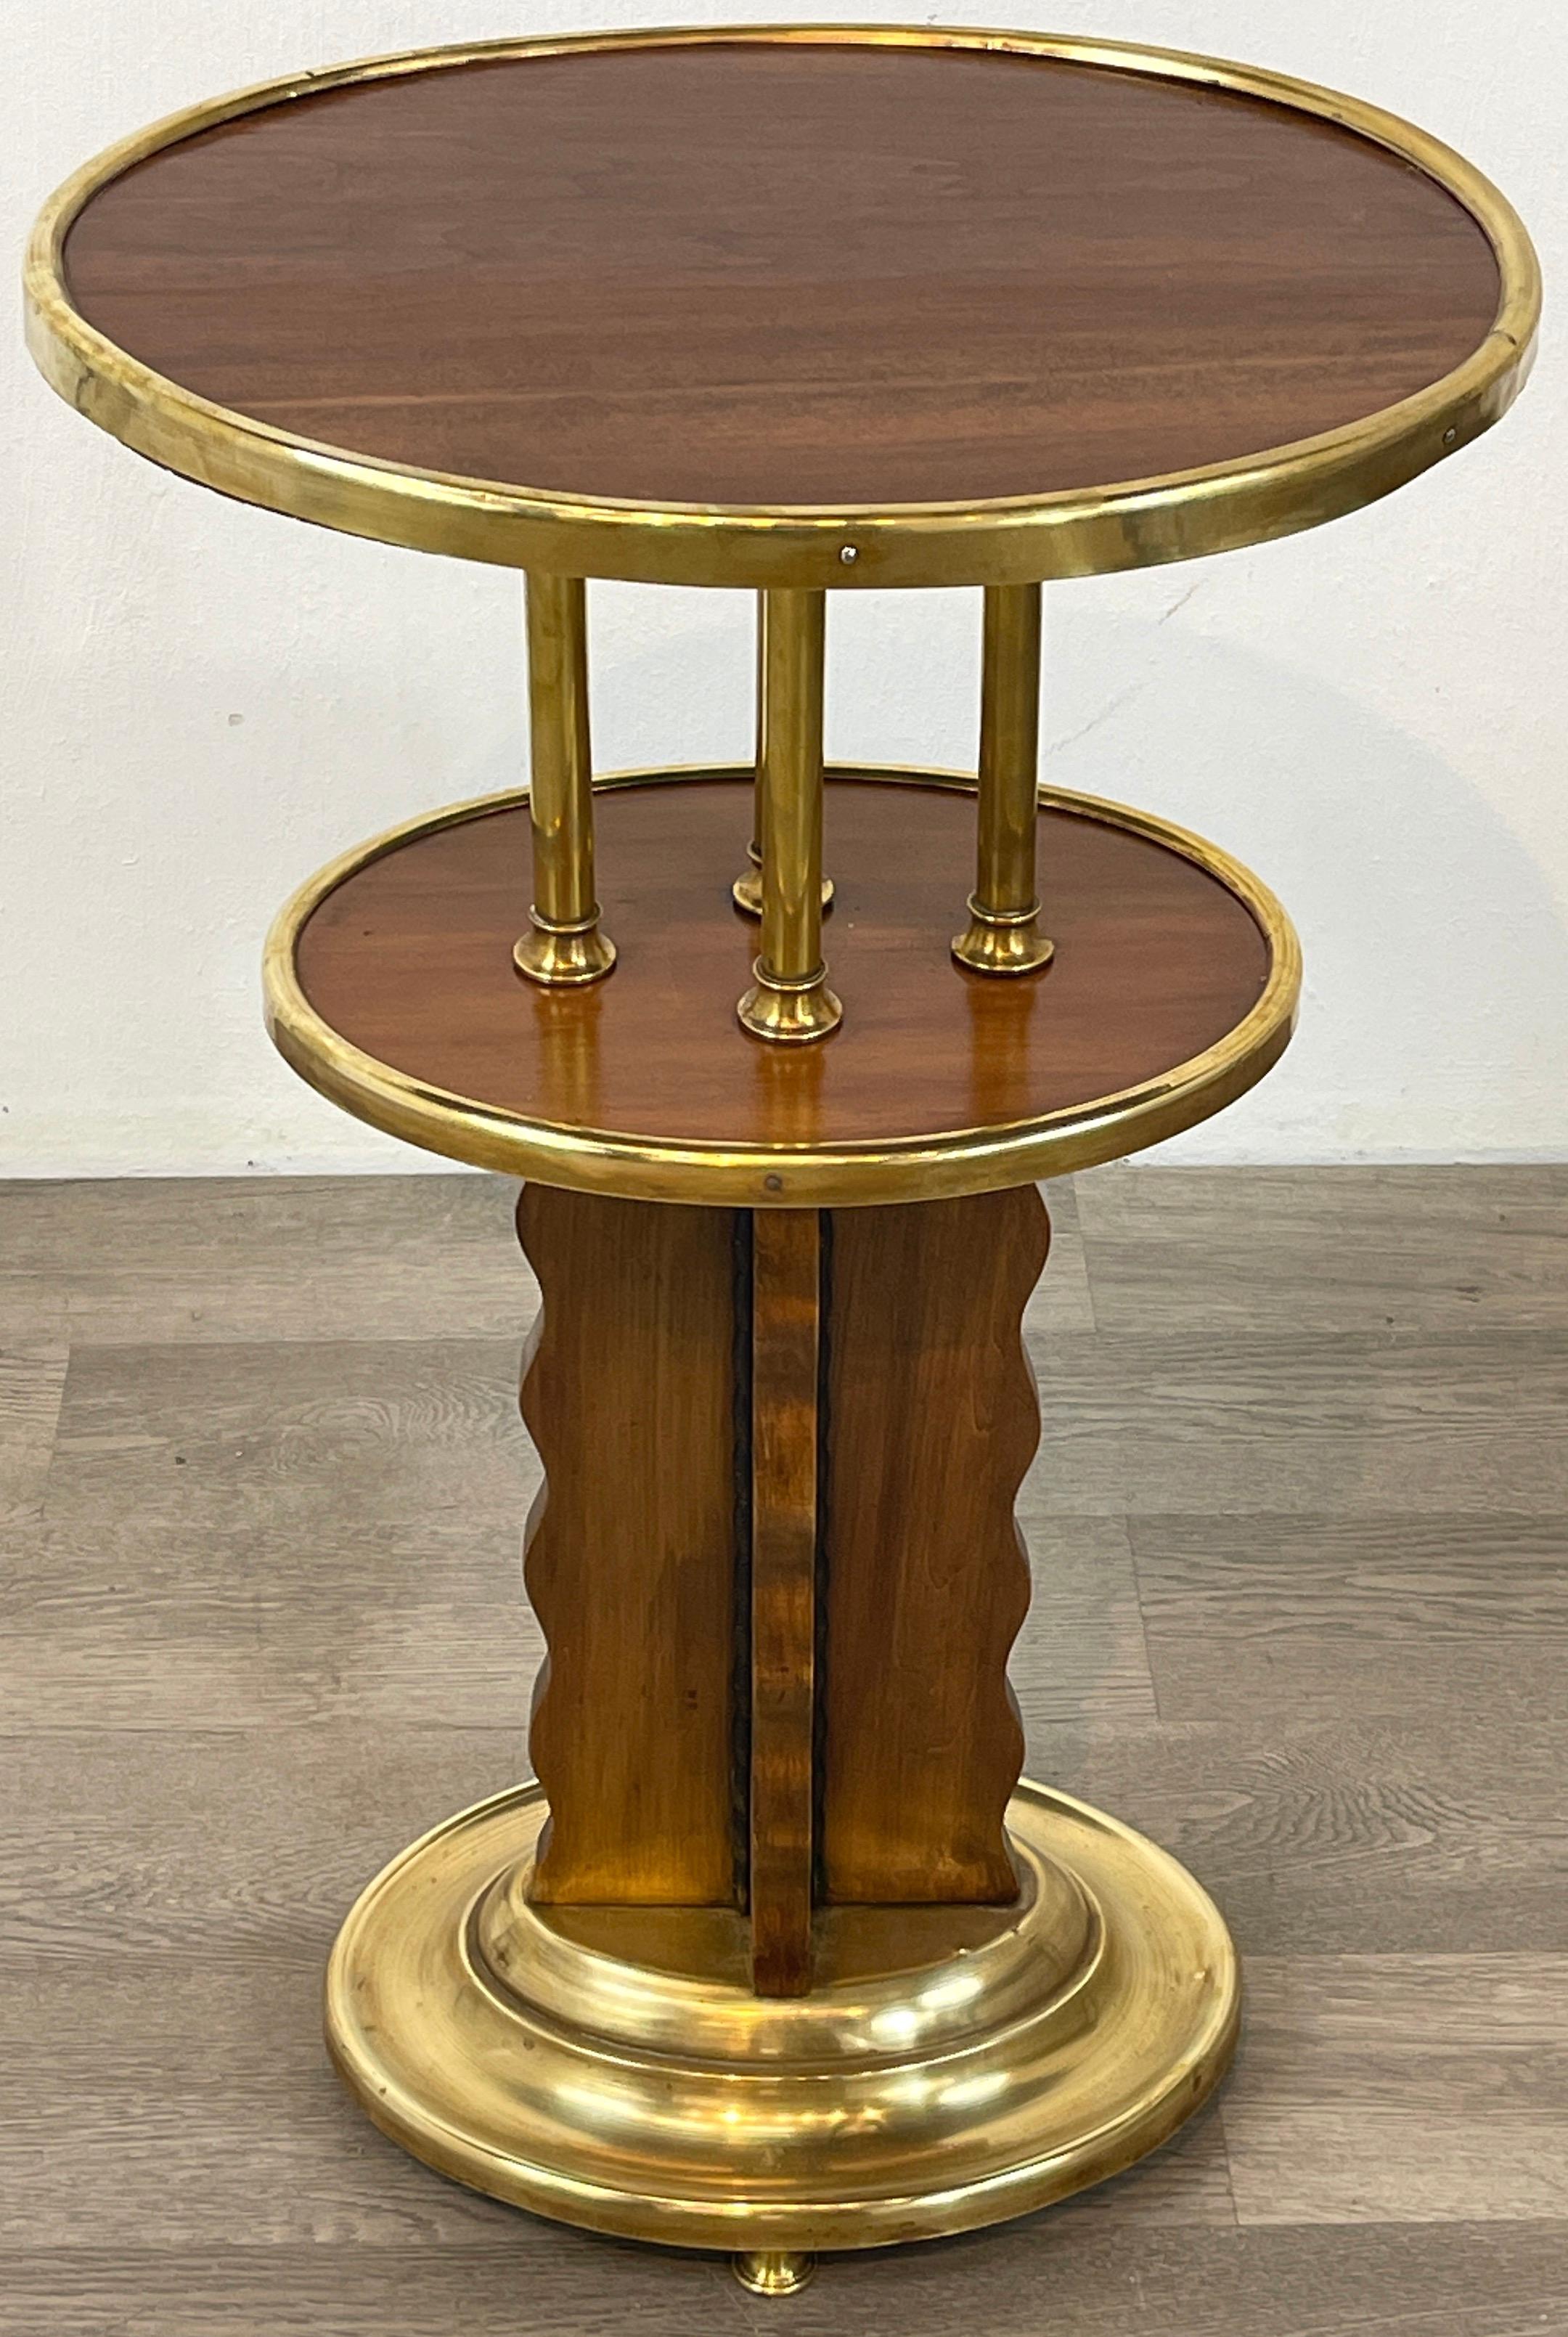 Viennese Secession Brass Mounted Hardwood Side Table, Austria C. 1920 For Sale 1